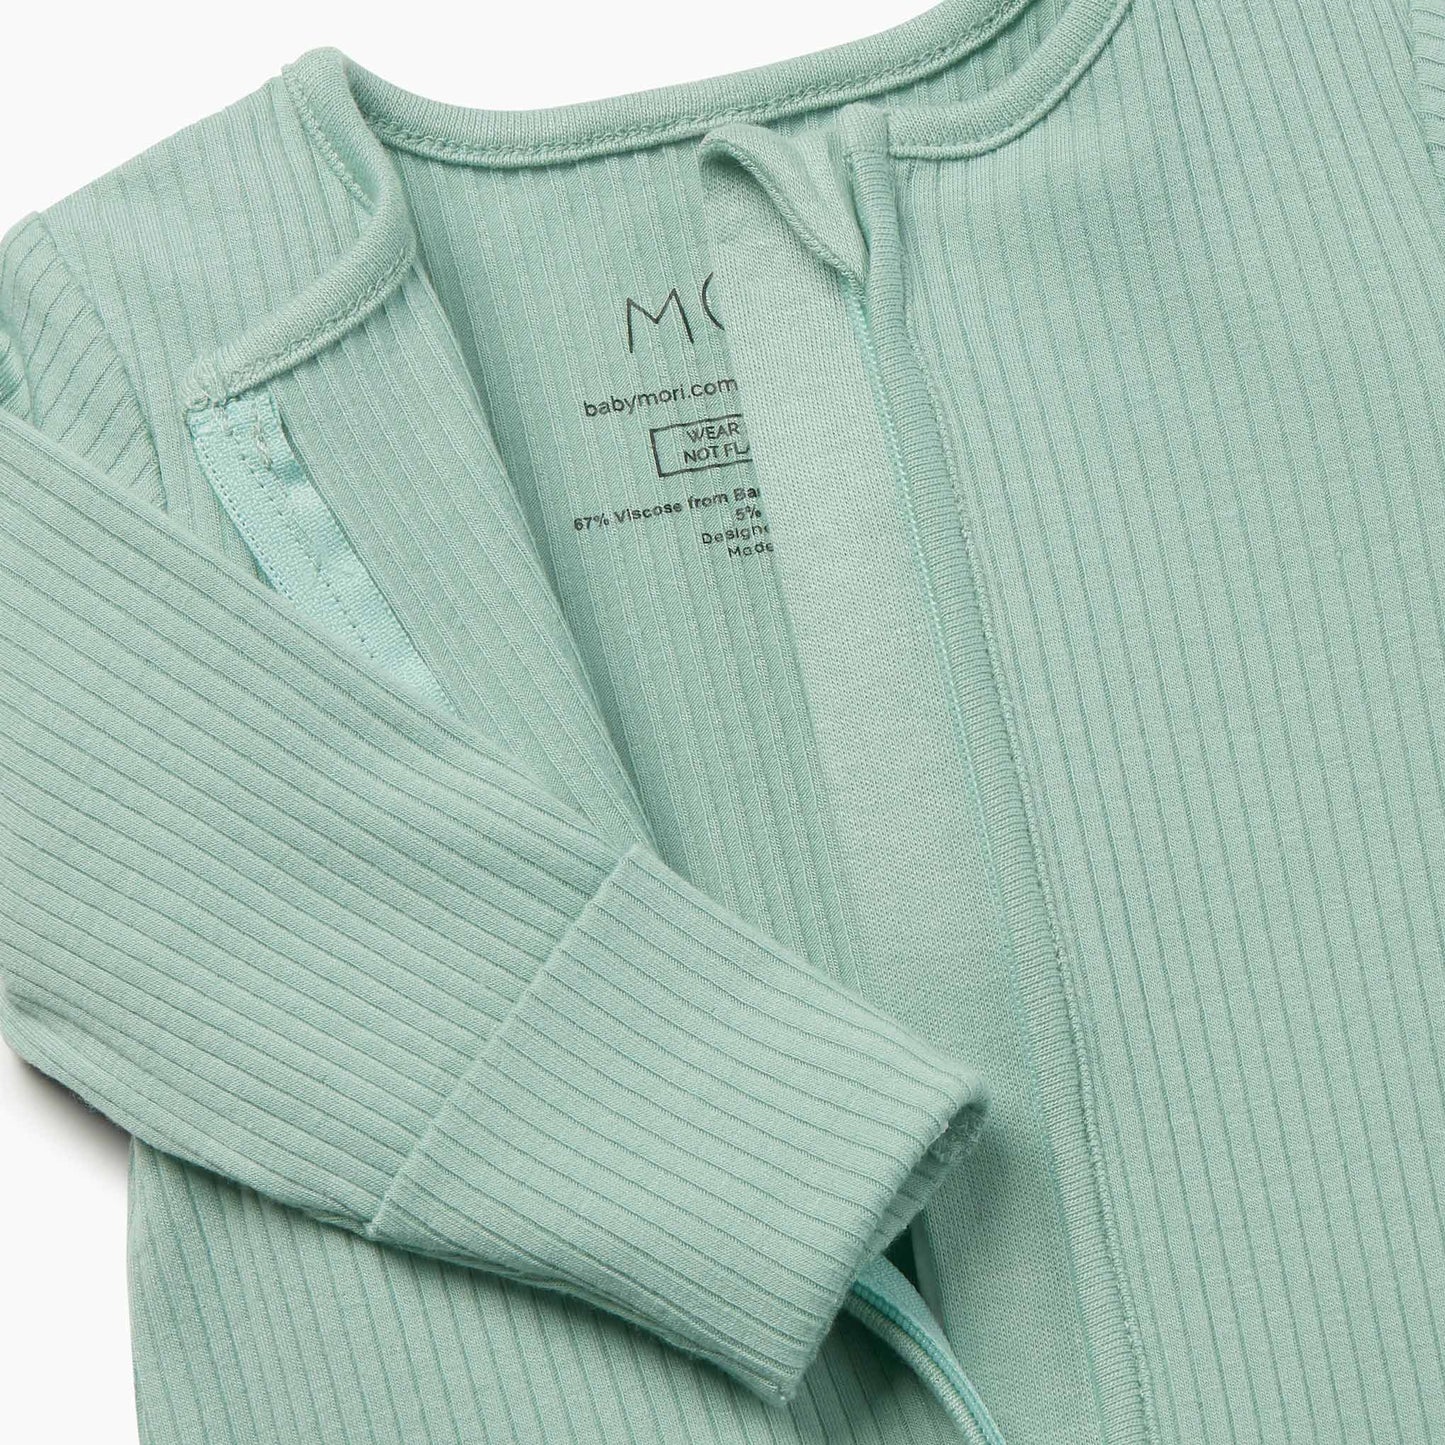 Mint ribbed zip up sleepsuit close up